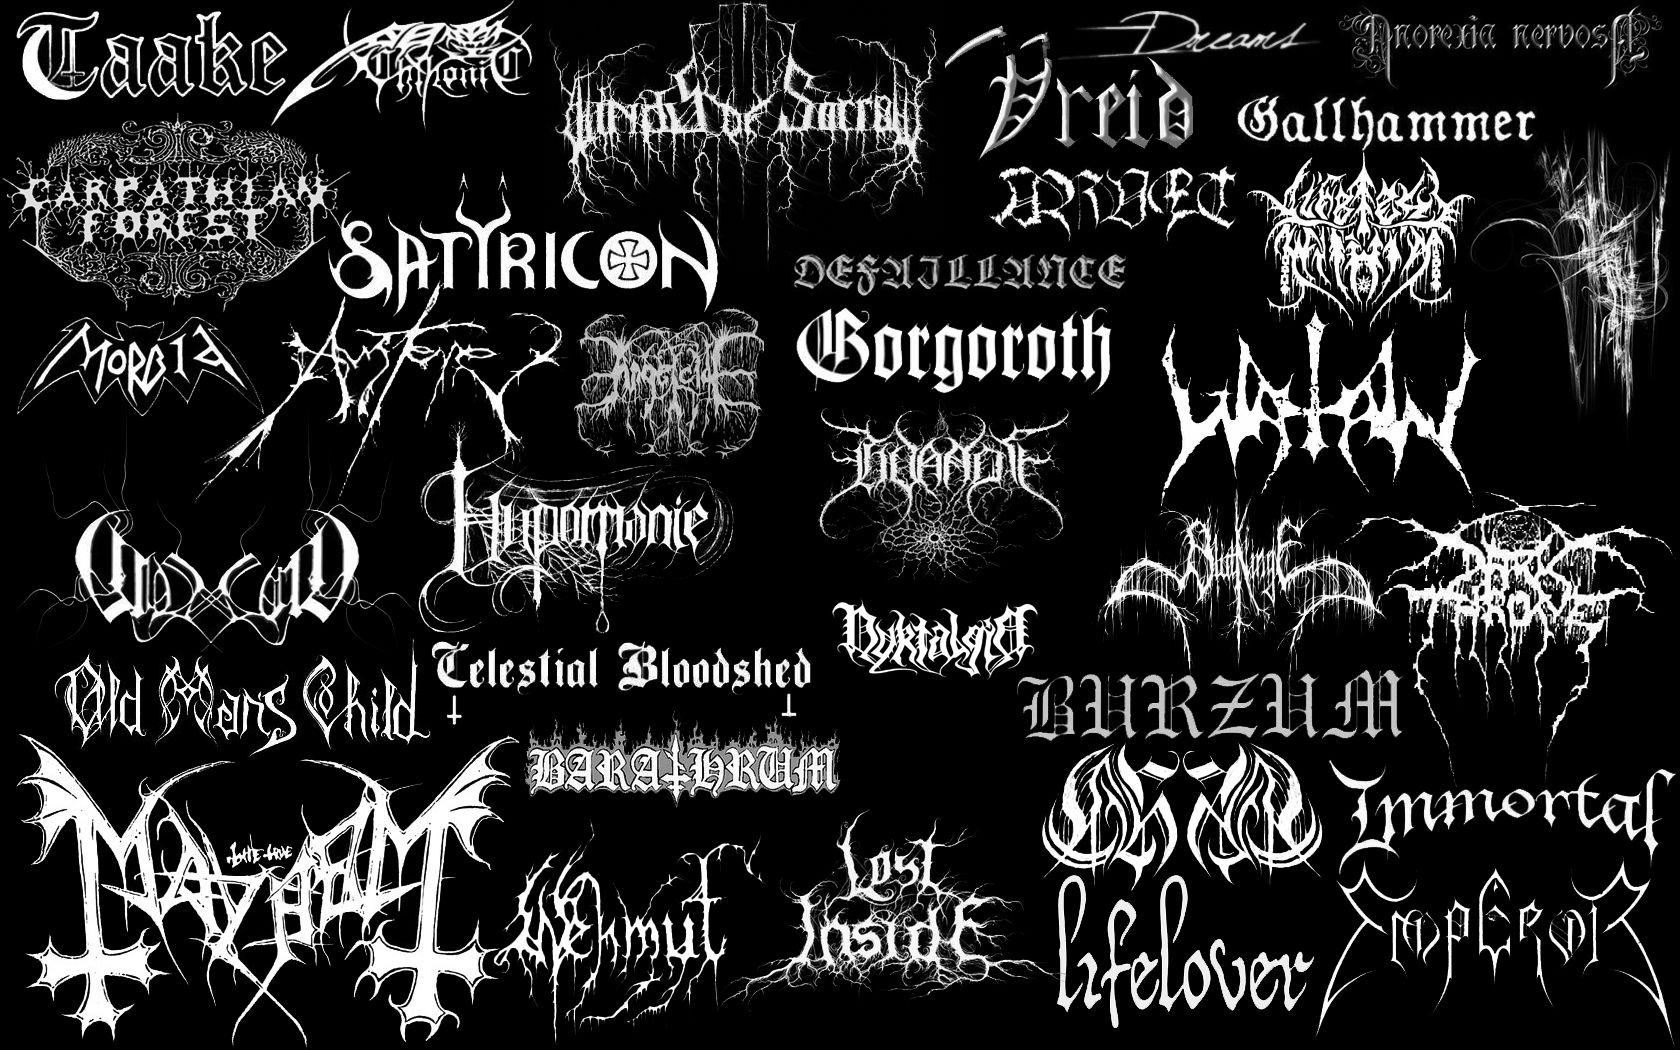 Black Metal Wallpaper. Free Wallpaper Download For Android